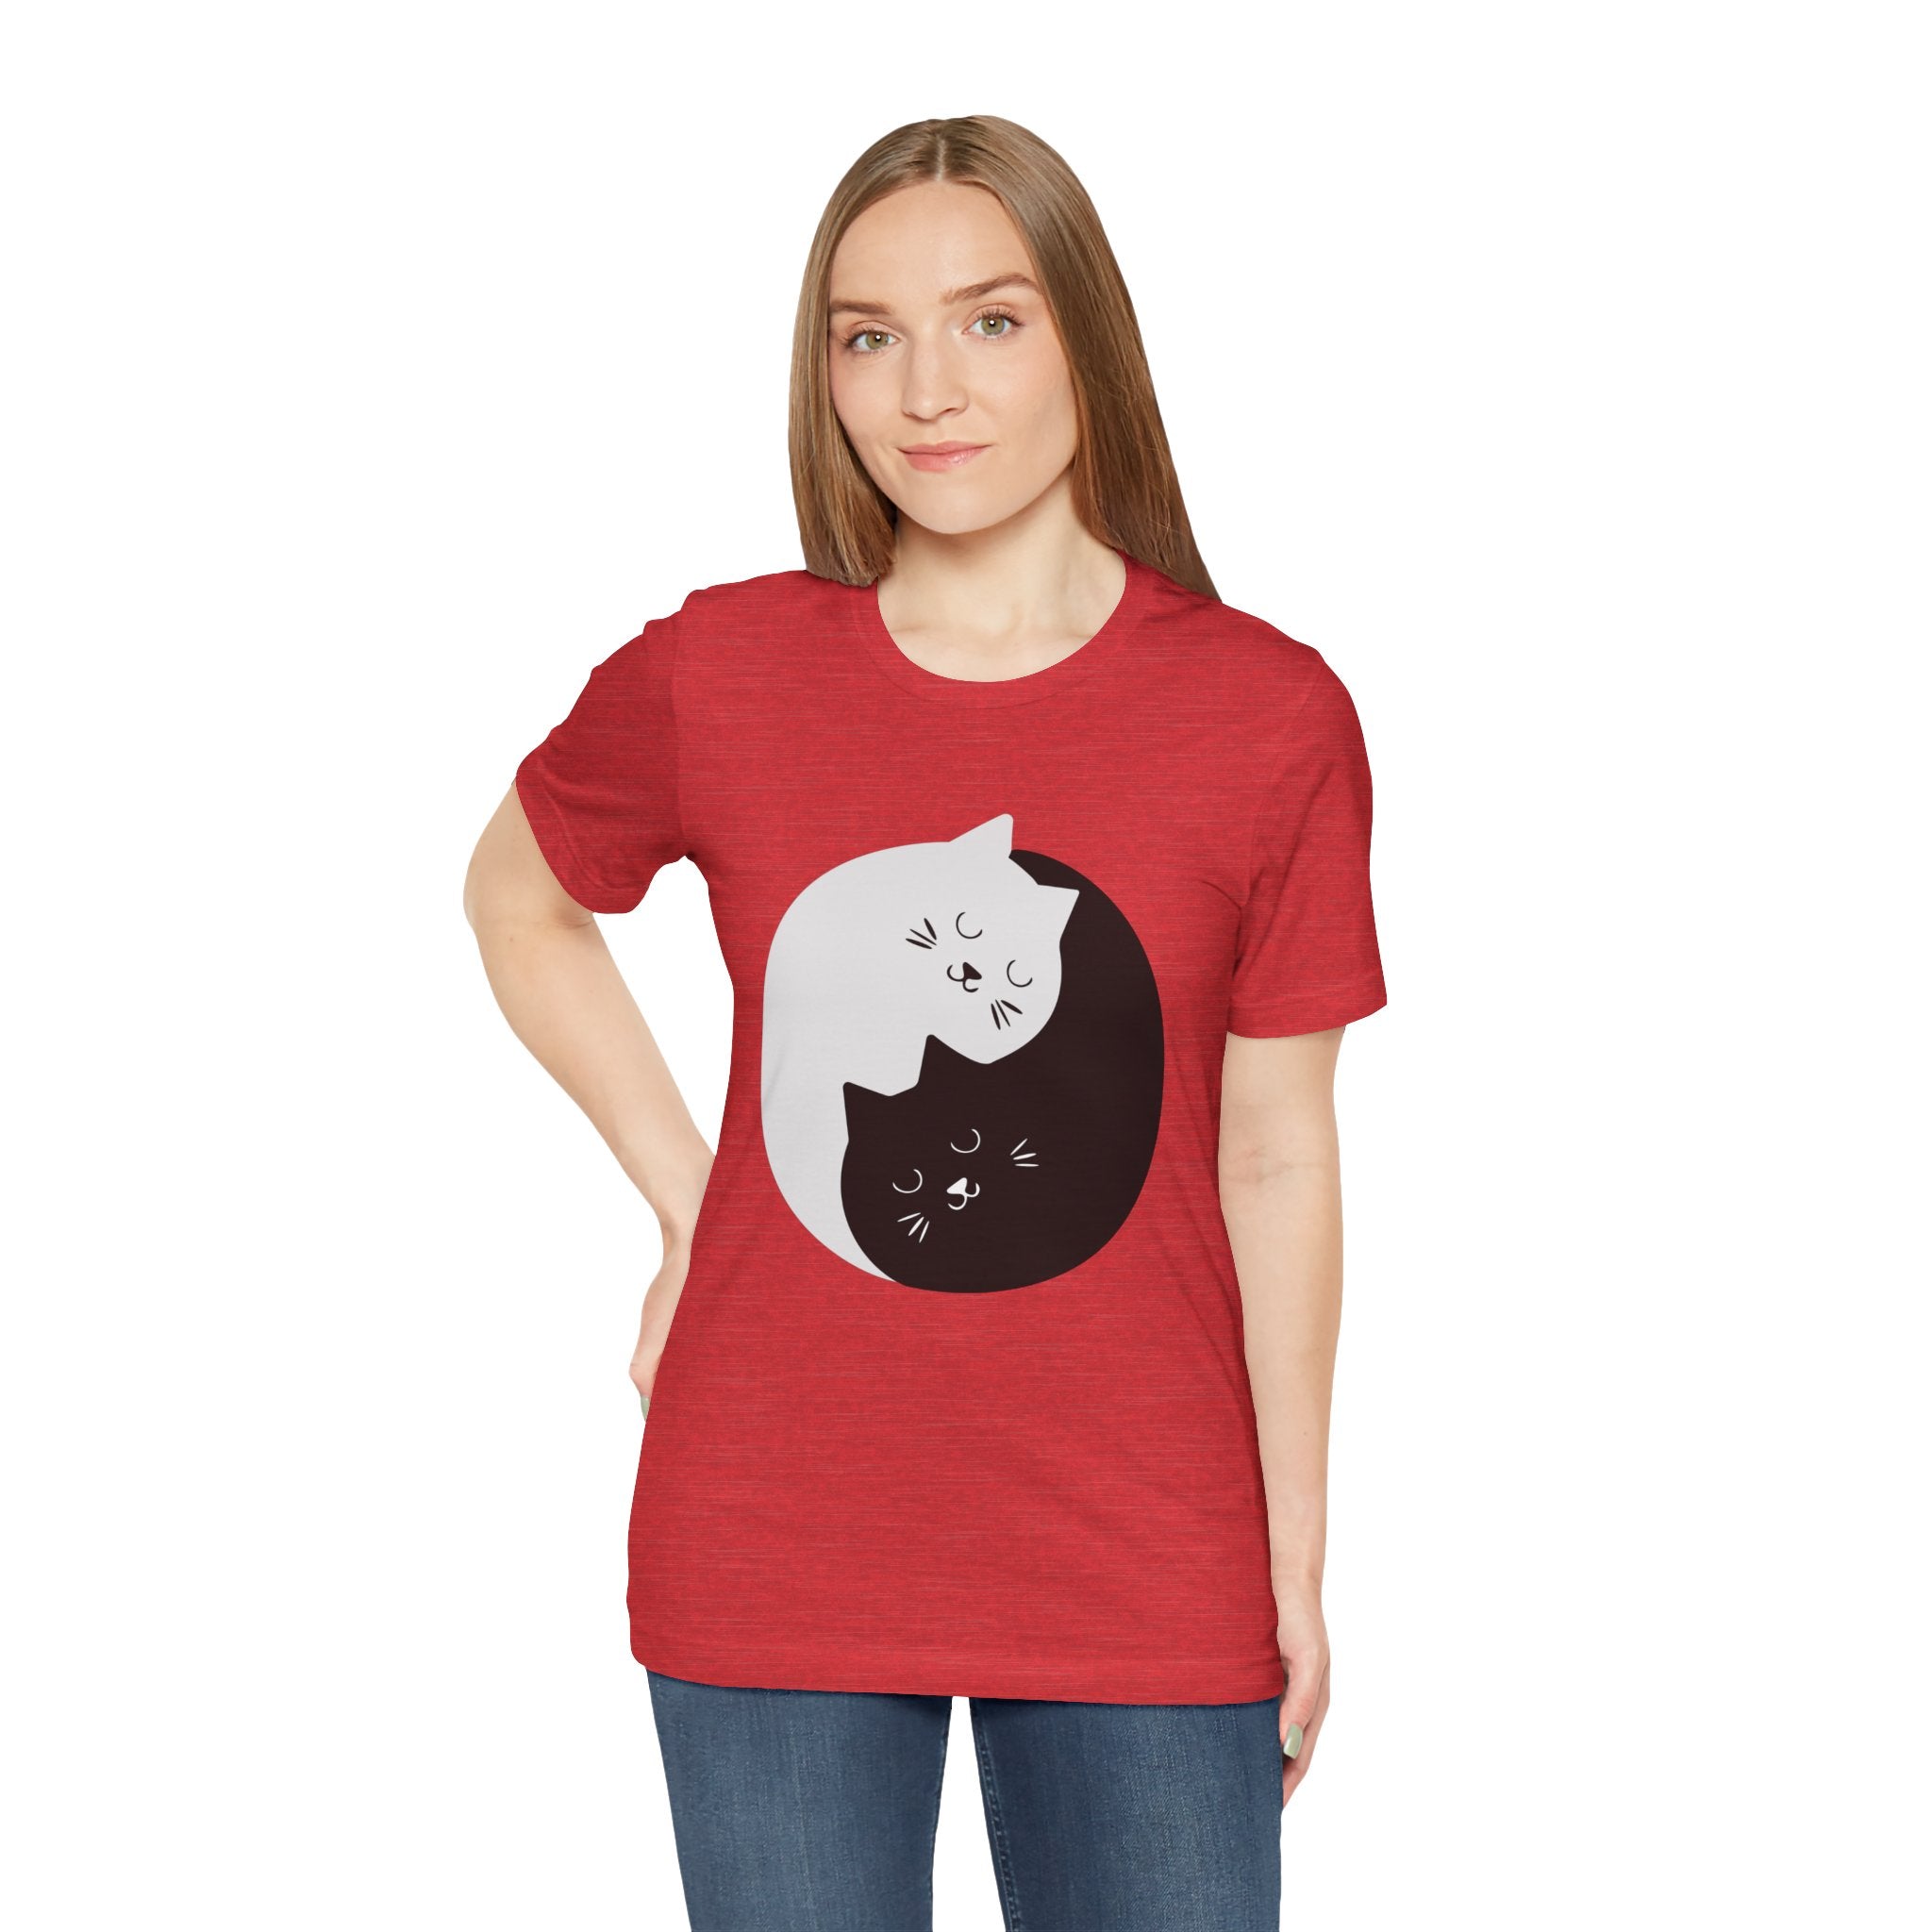 Young woman in a YING-ANG KITTIES T-Shirt, standing against a plain background.